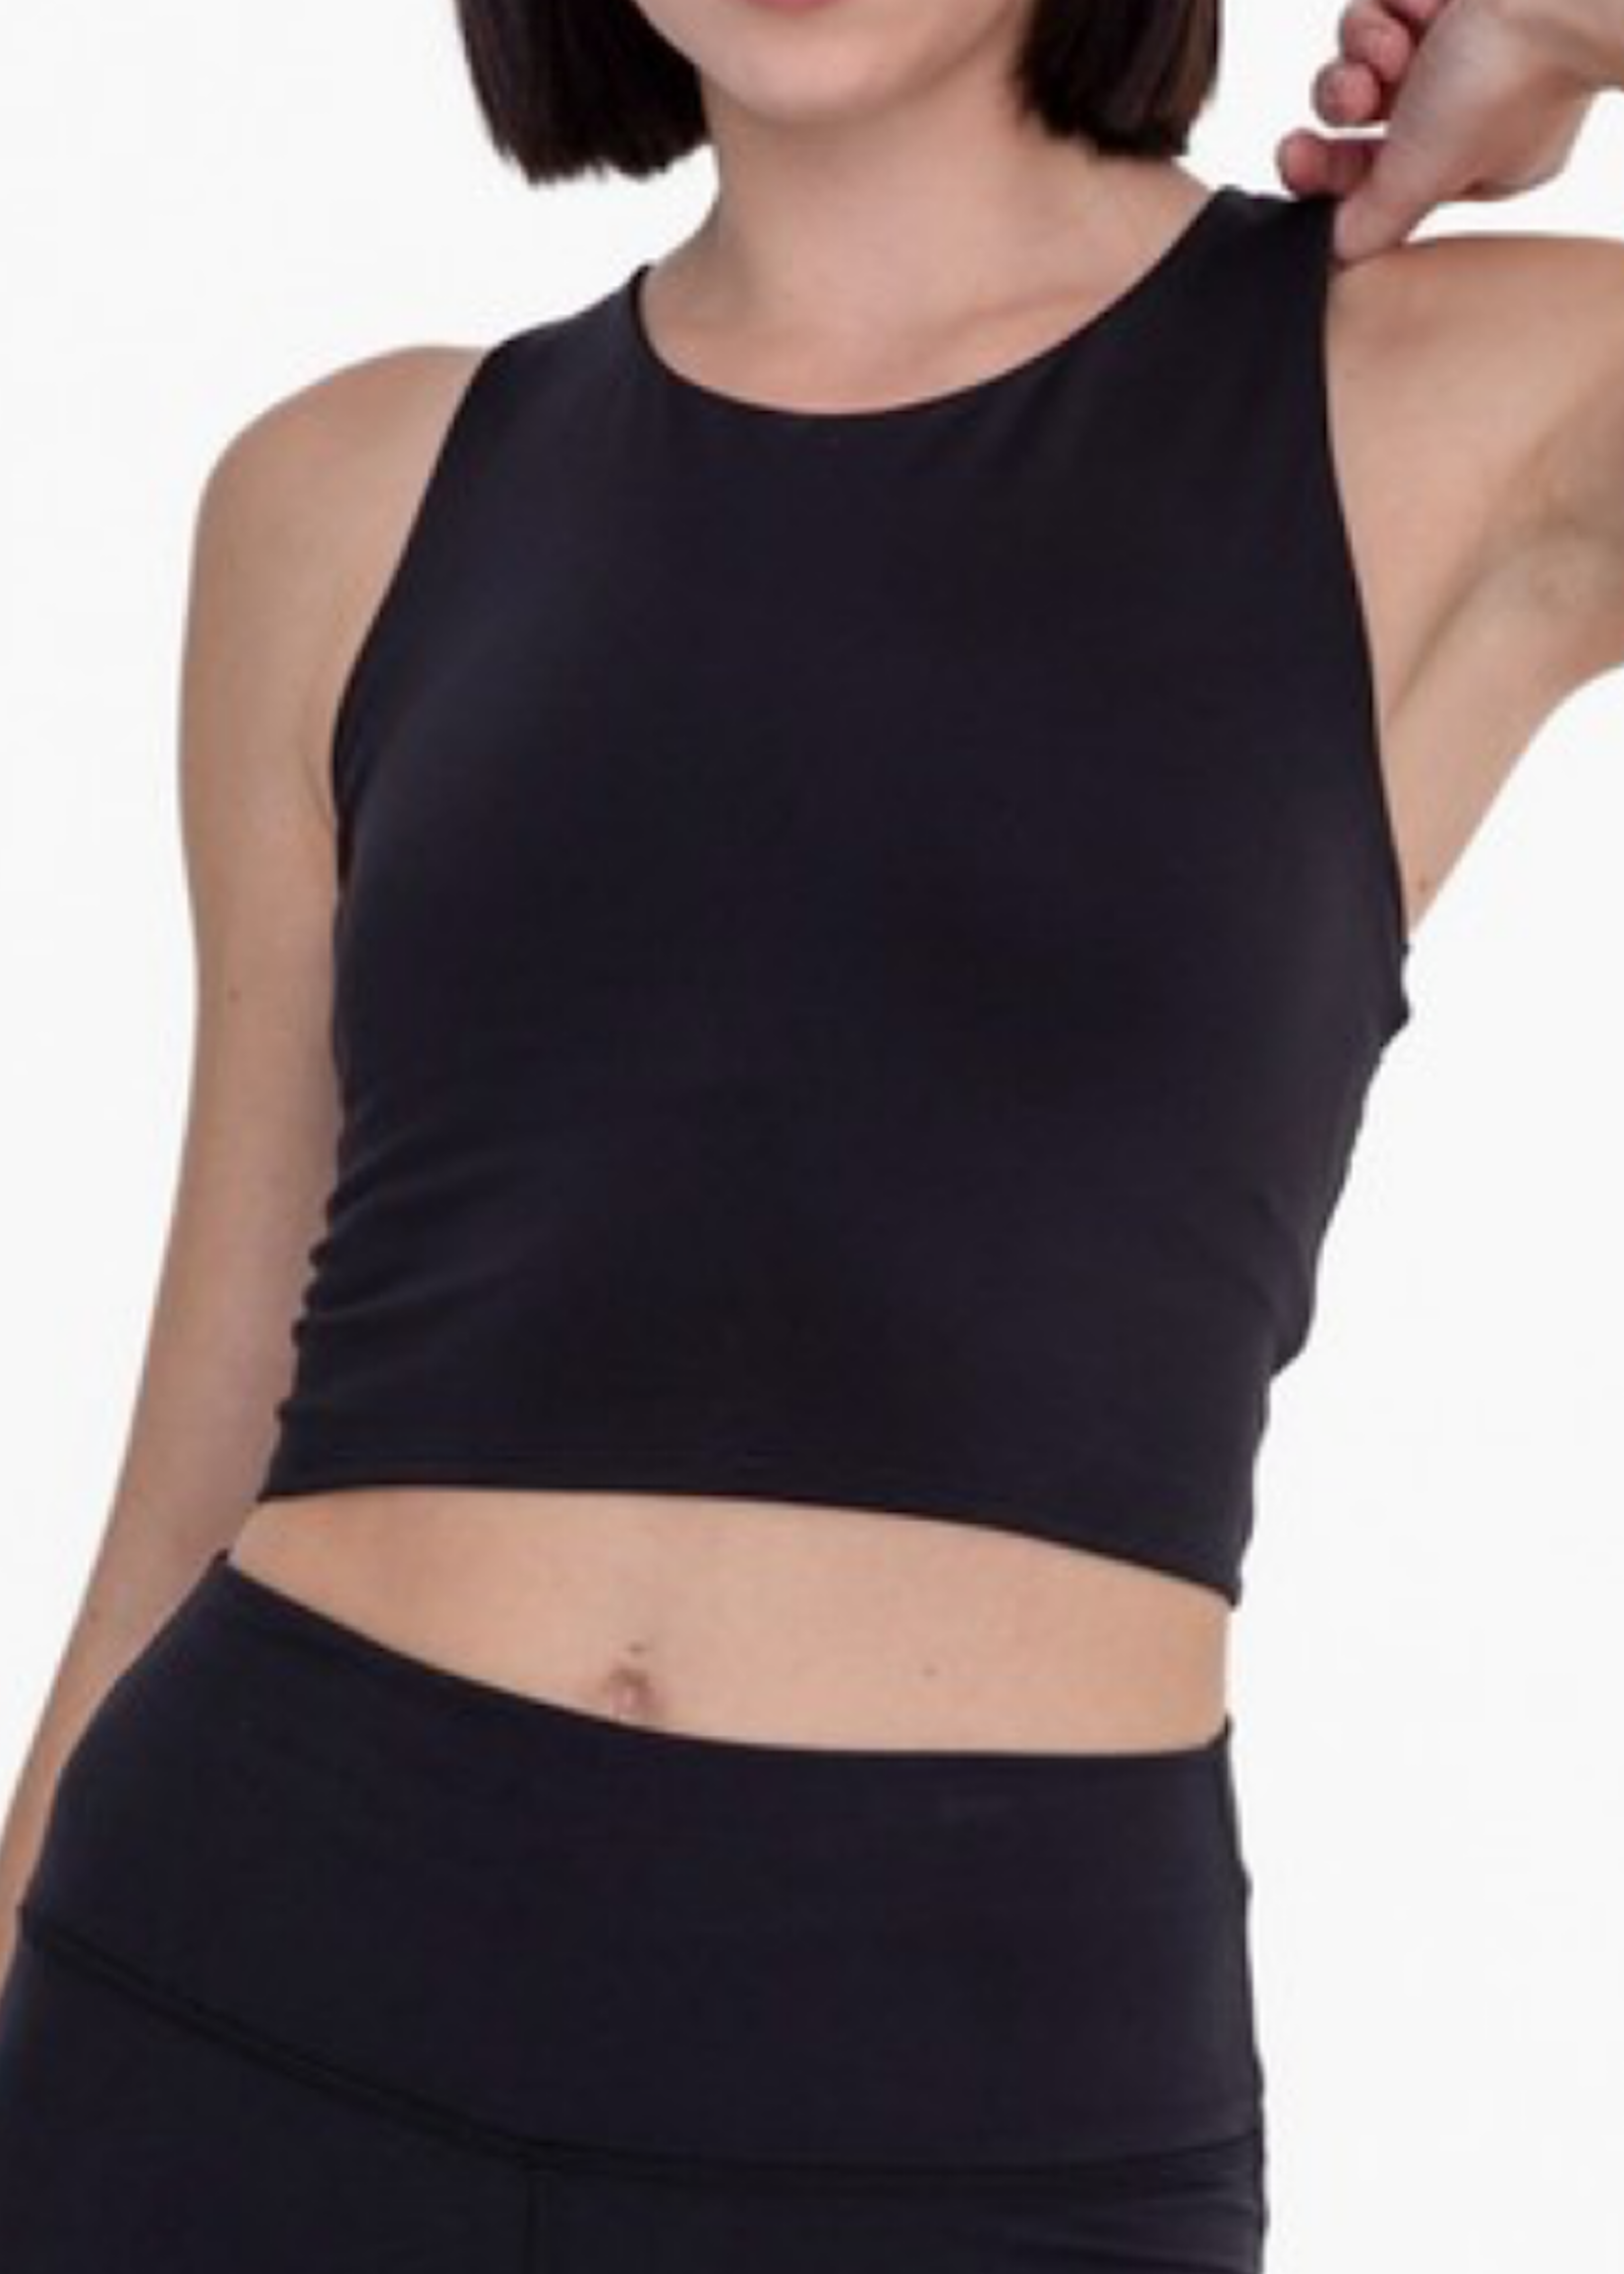 Black Strap Back Cropped Top with Built In Sports Bra